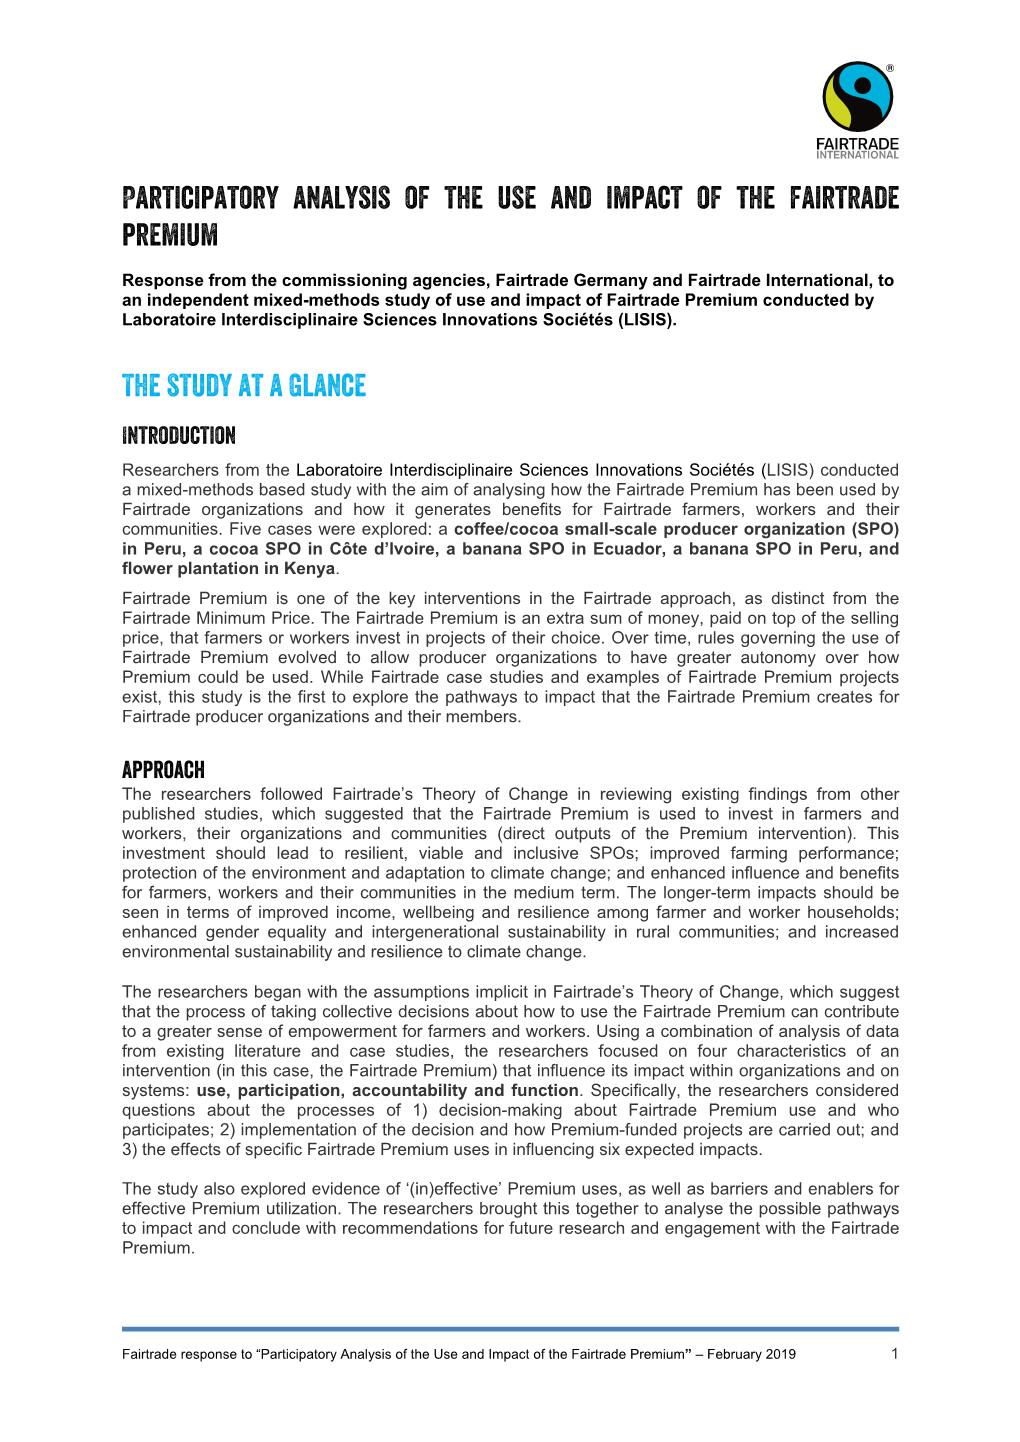 Participatory Analysis of the Use and Impact of the Fairtrade Premium The